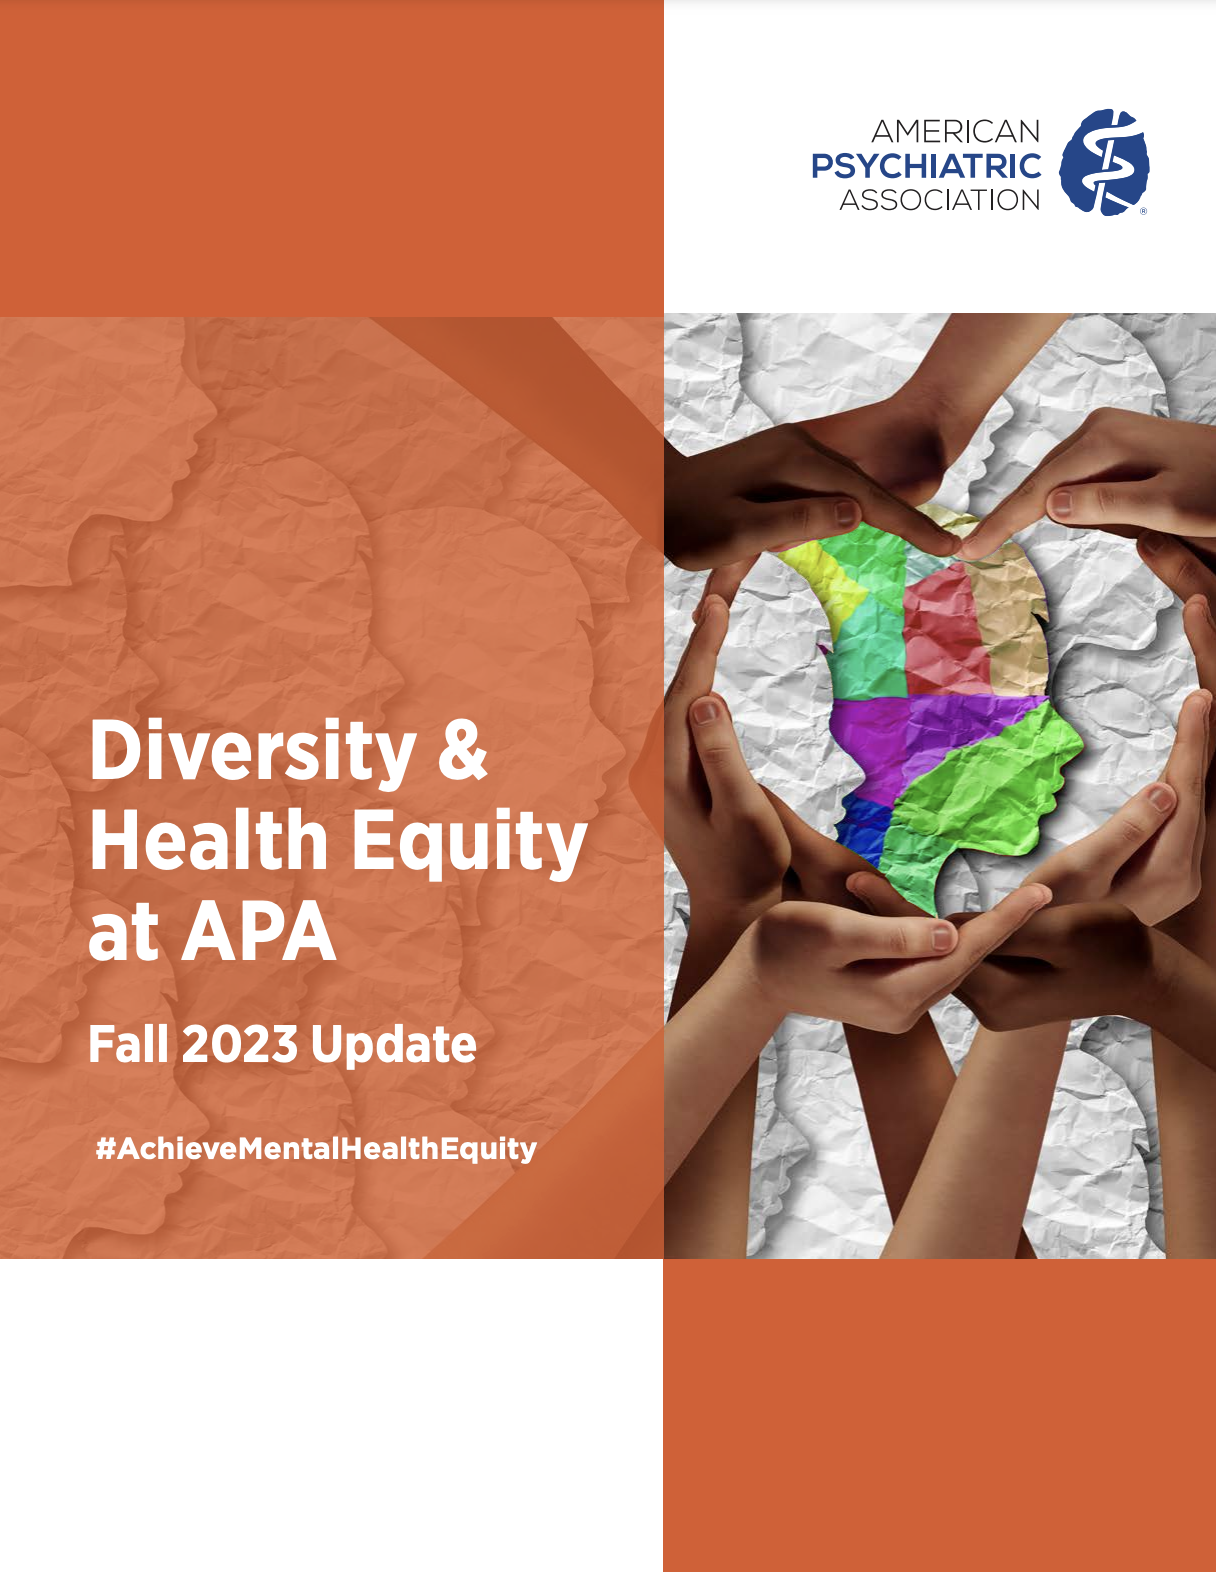 American Psychiatric Association Diversity and Health Equity at APA Fall 2023 Update #AchieveMentalHealthEquity